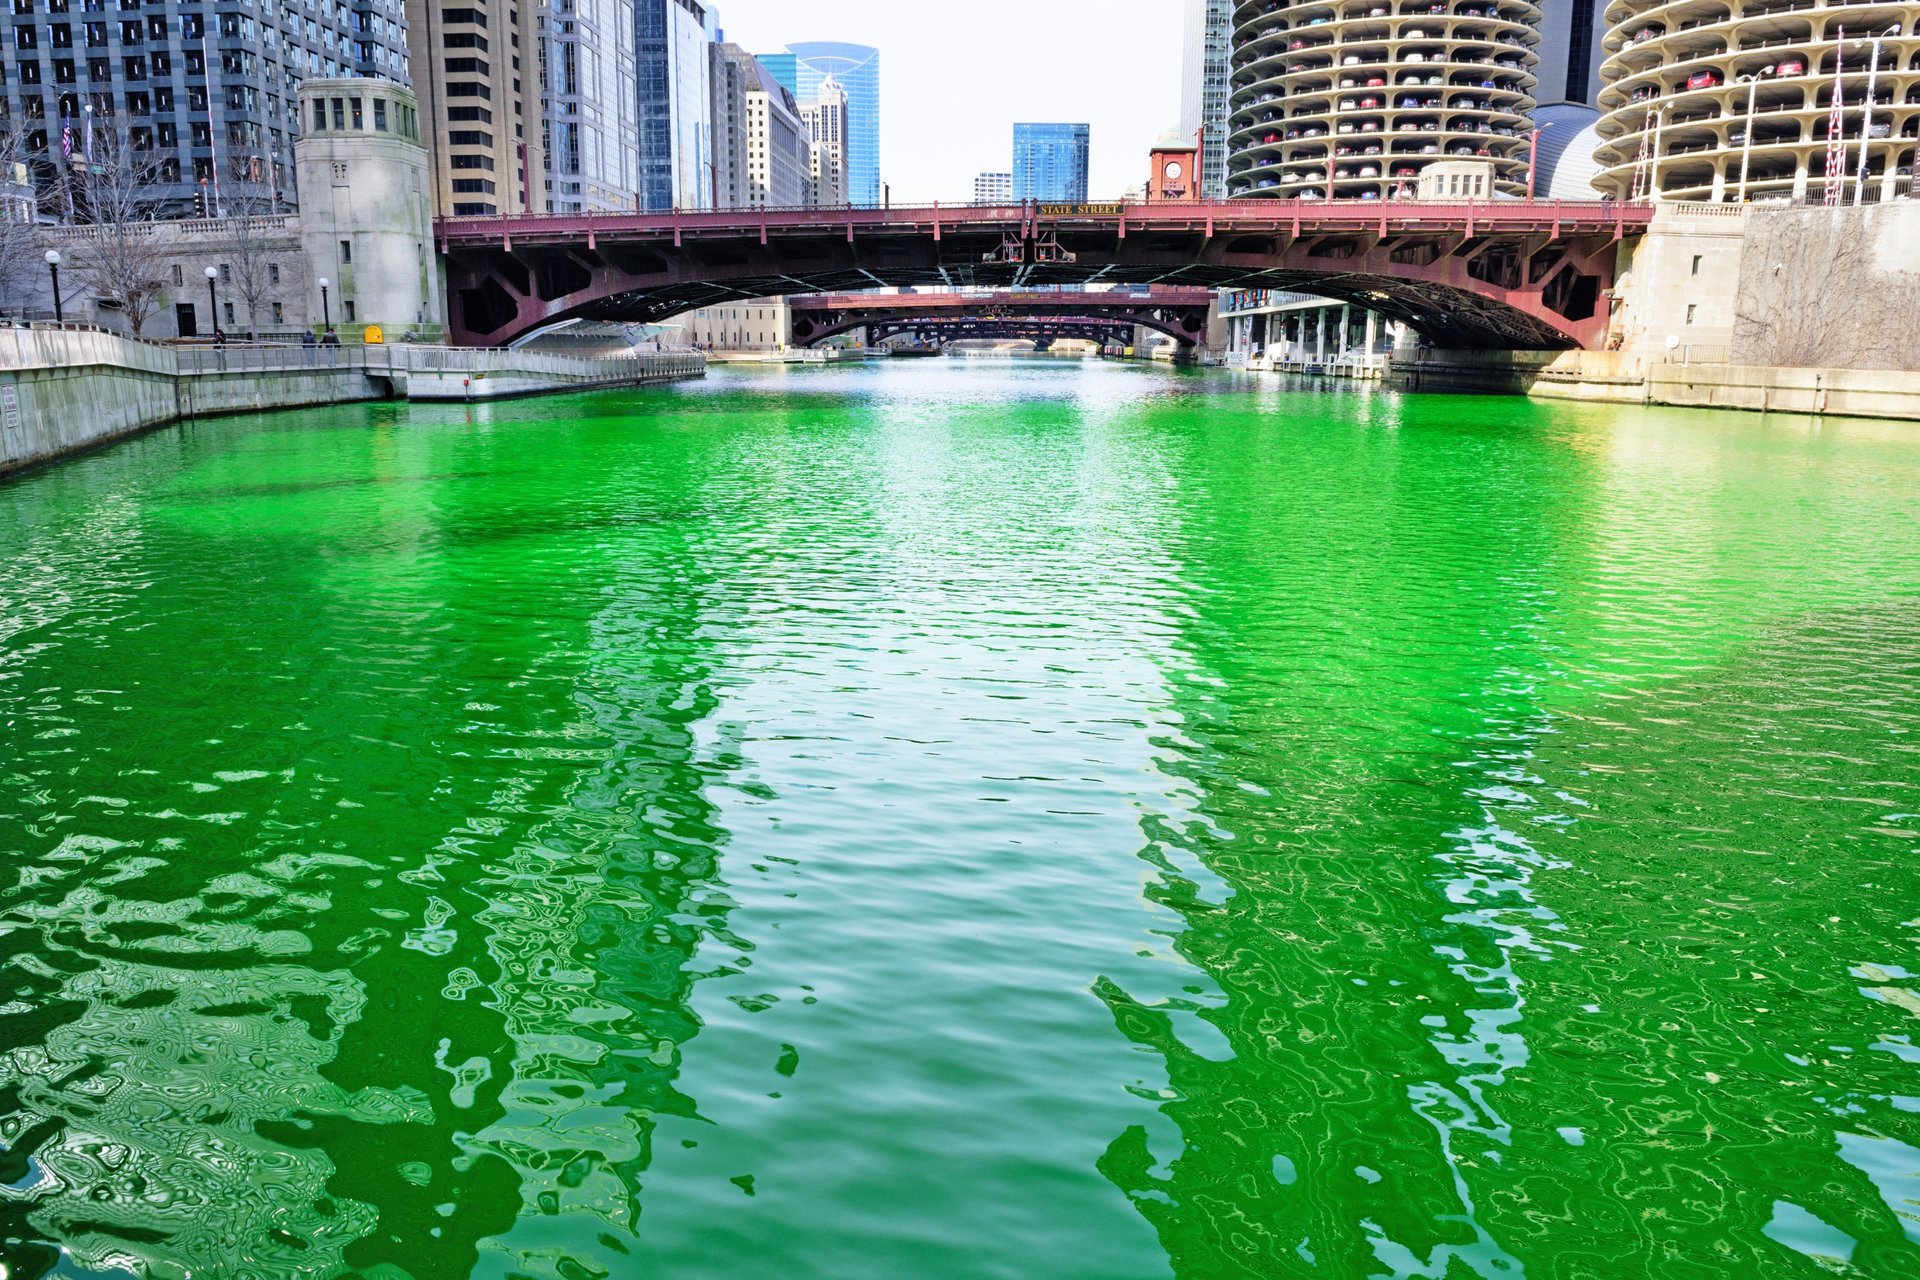 The Chicago River is dyed a vibrant green, with city buildings and bridges in the background.